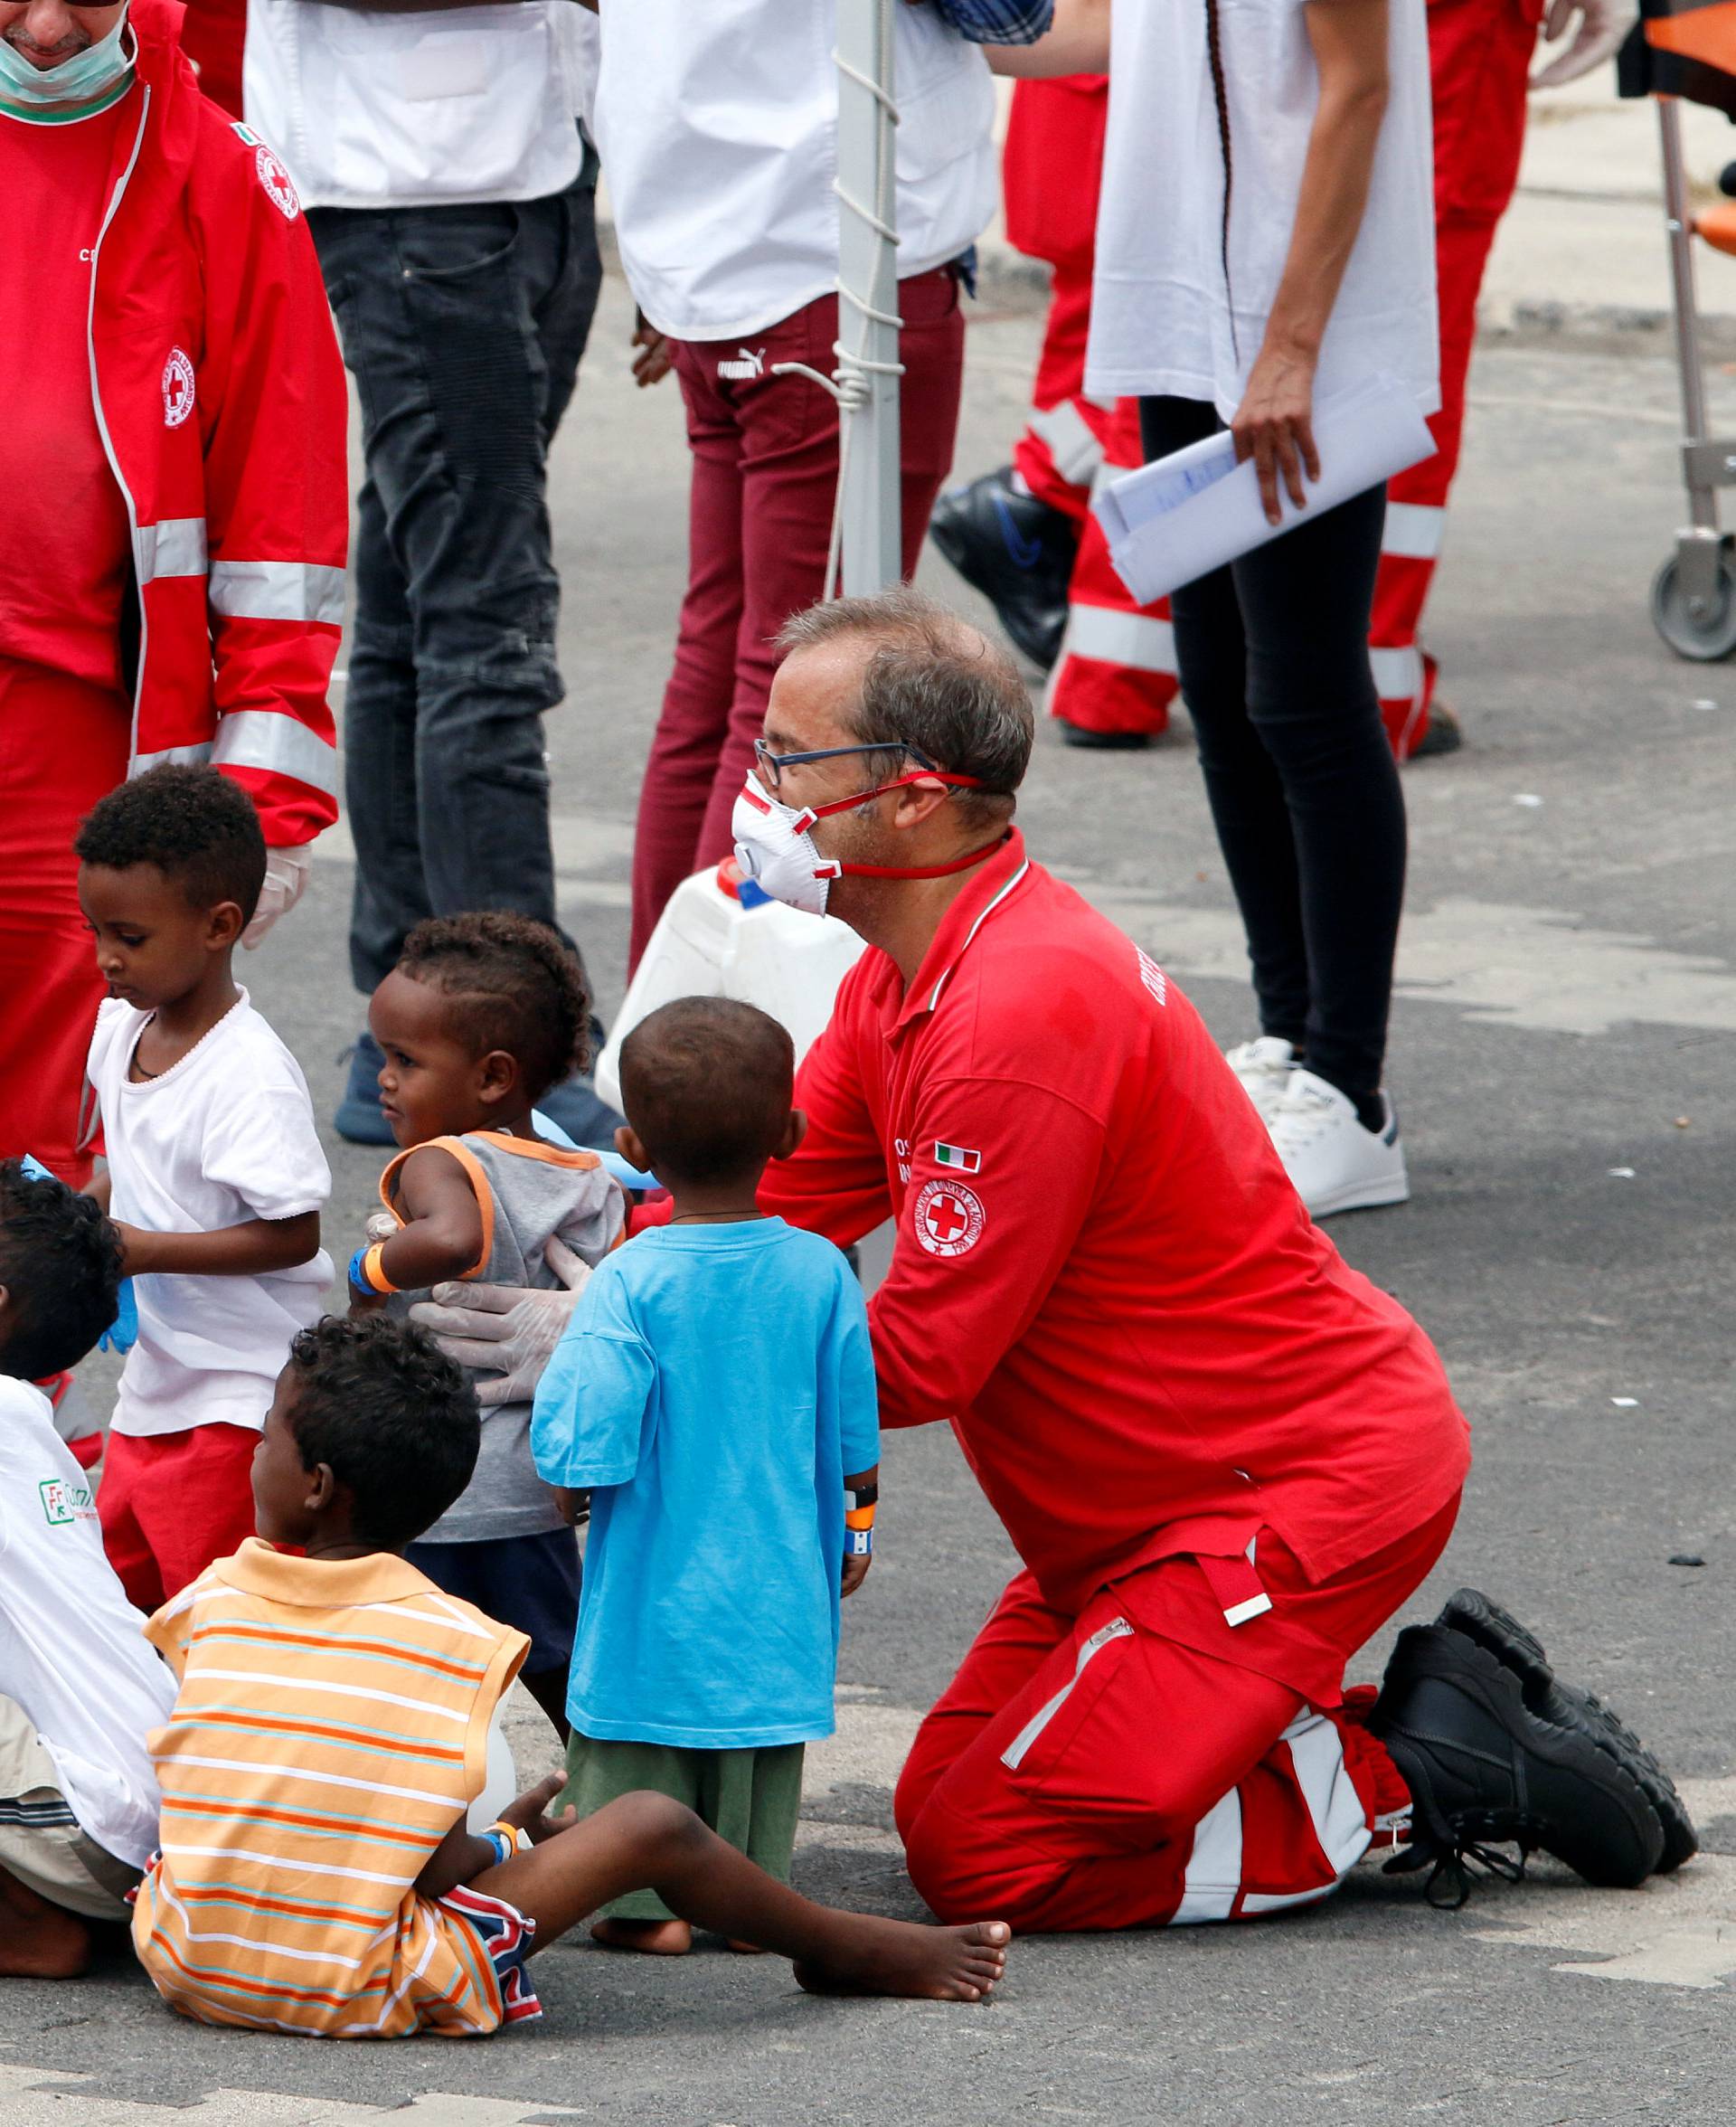 Italian Red Cross personnel play with children after they disembarked the Italian coast guard vessel "Diciotti" at the port of Catania